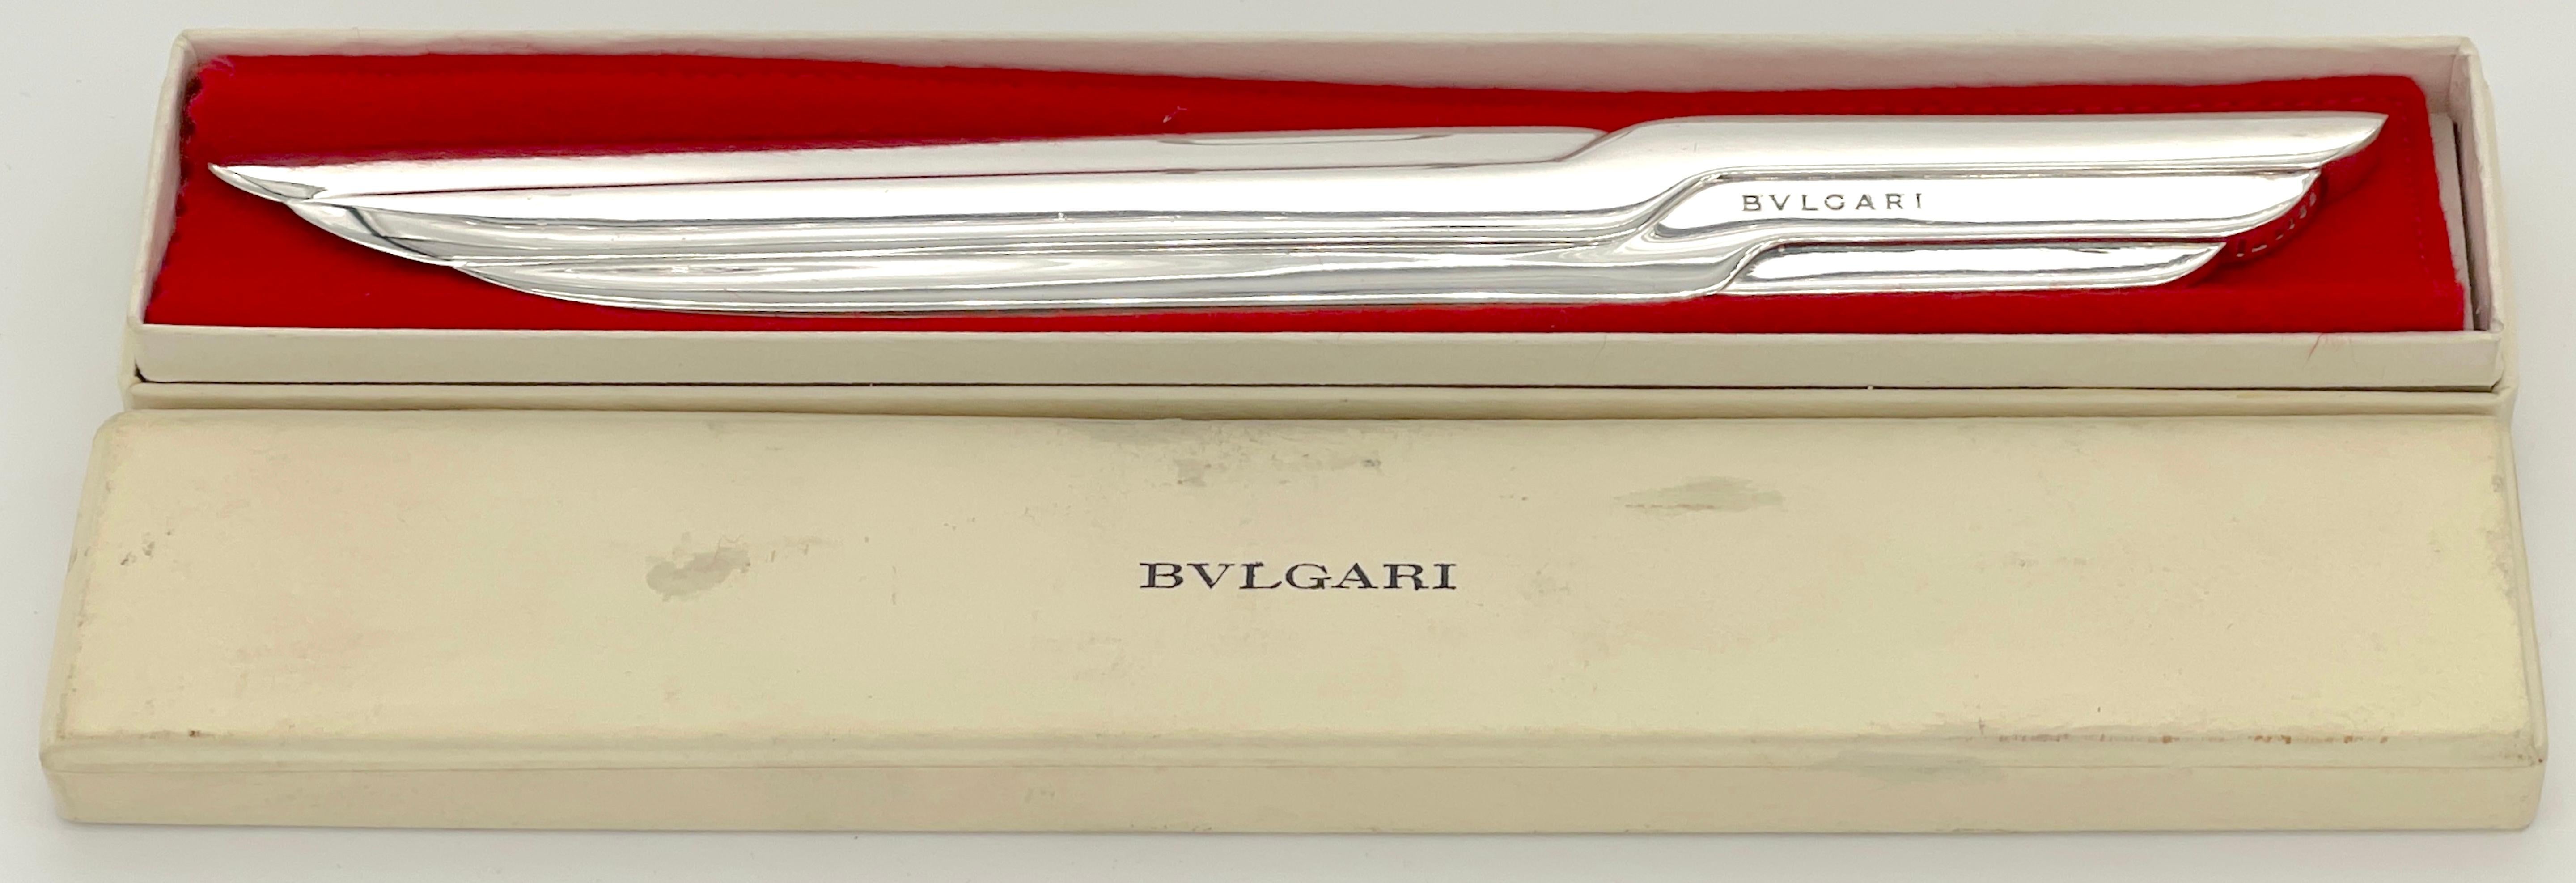 Bvlgari Sterling Silver Modern Sculptural Letter Opener / 'Tagliacarte in Argento' 
Italy, circa 1960s, complete with original box and red velvet cloth

Experience the timeless elegance of this Bvlgari sterling silver modern sculptural letter